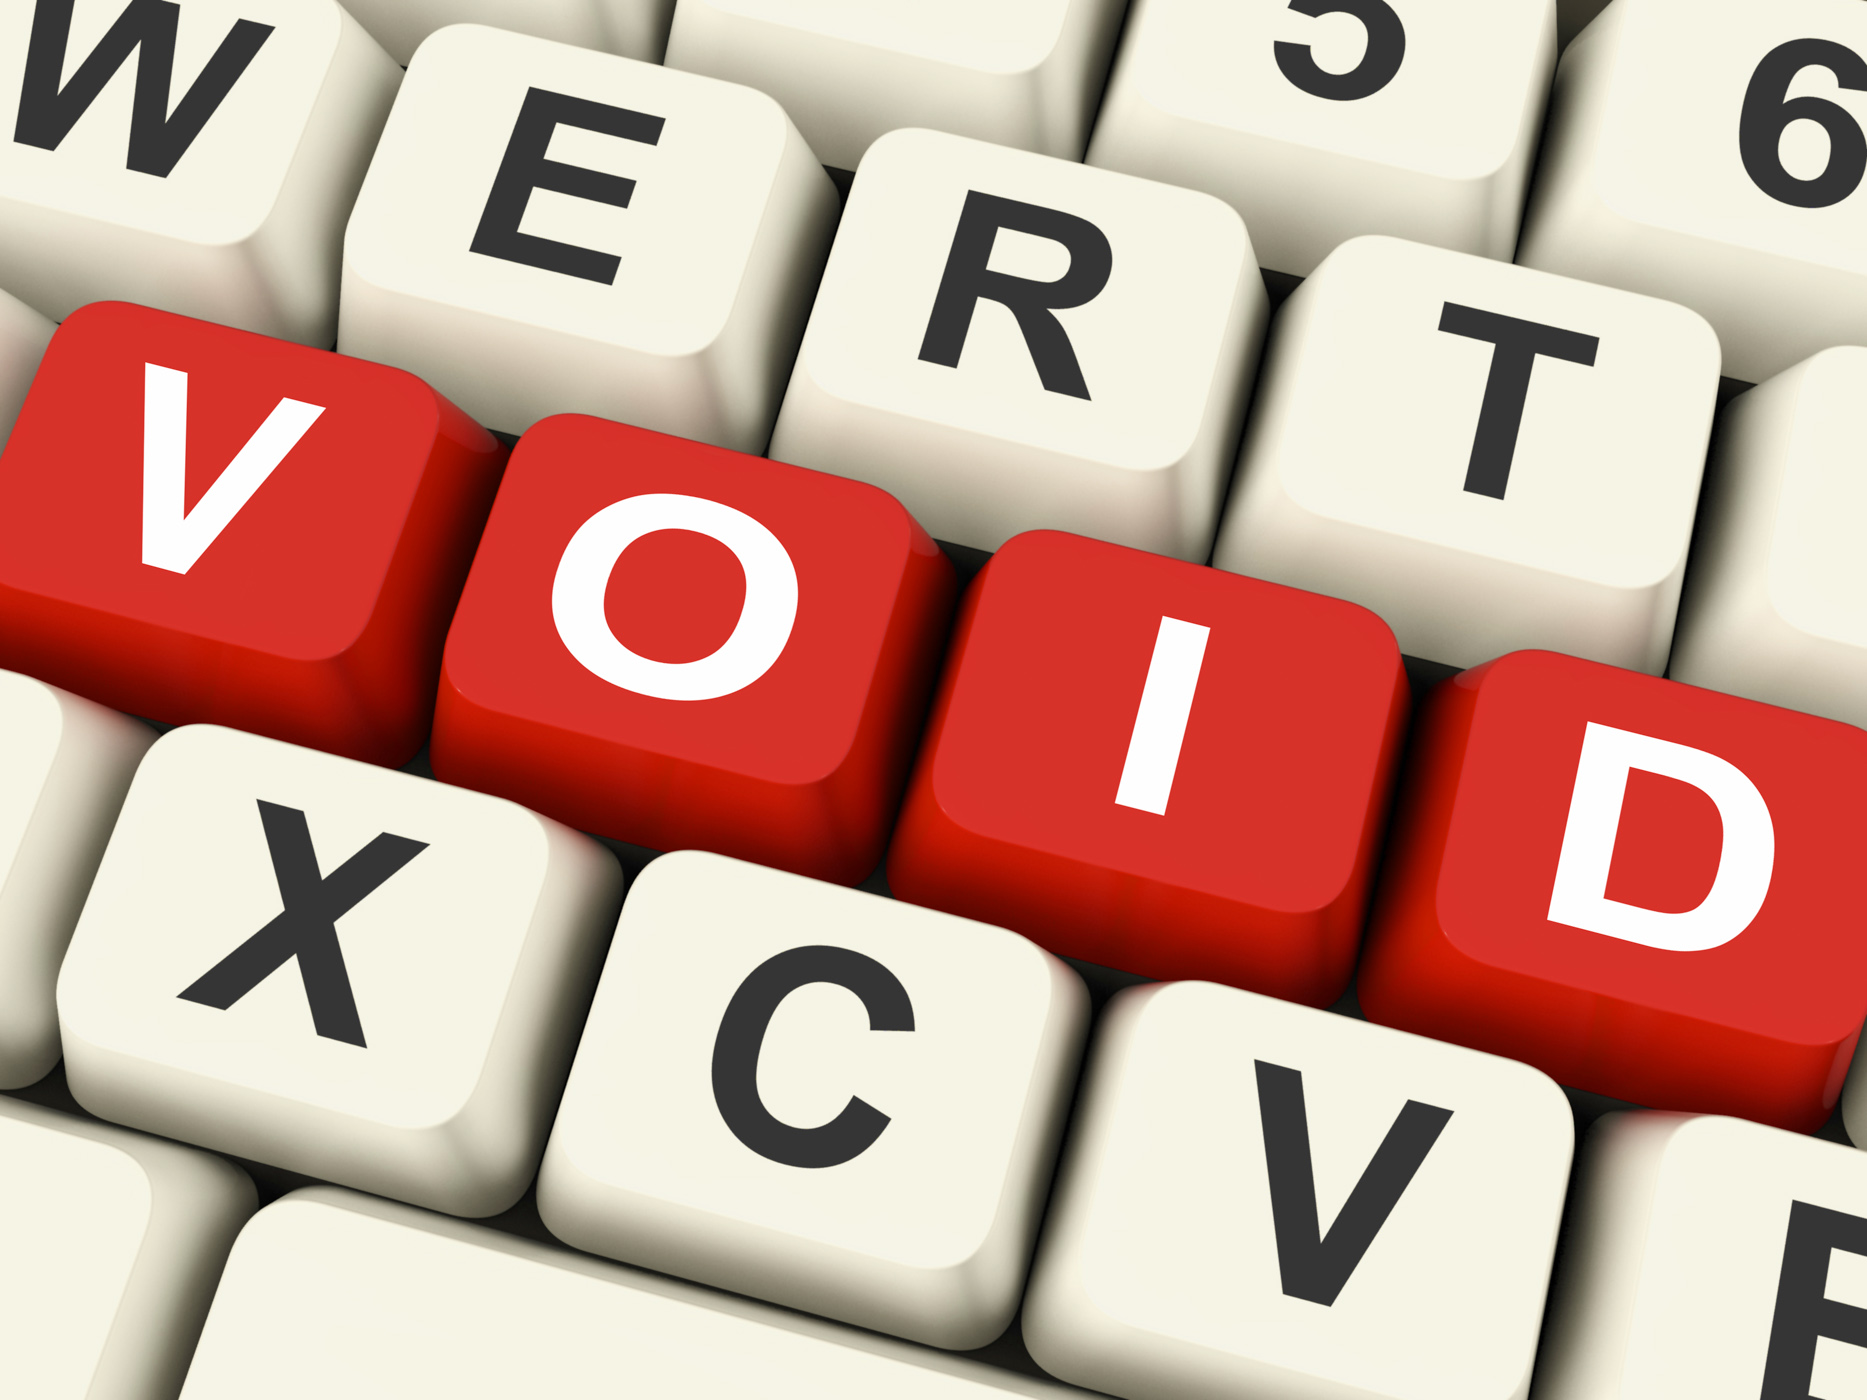 Void keys show invalid or invalidated online photo